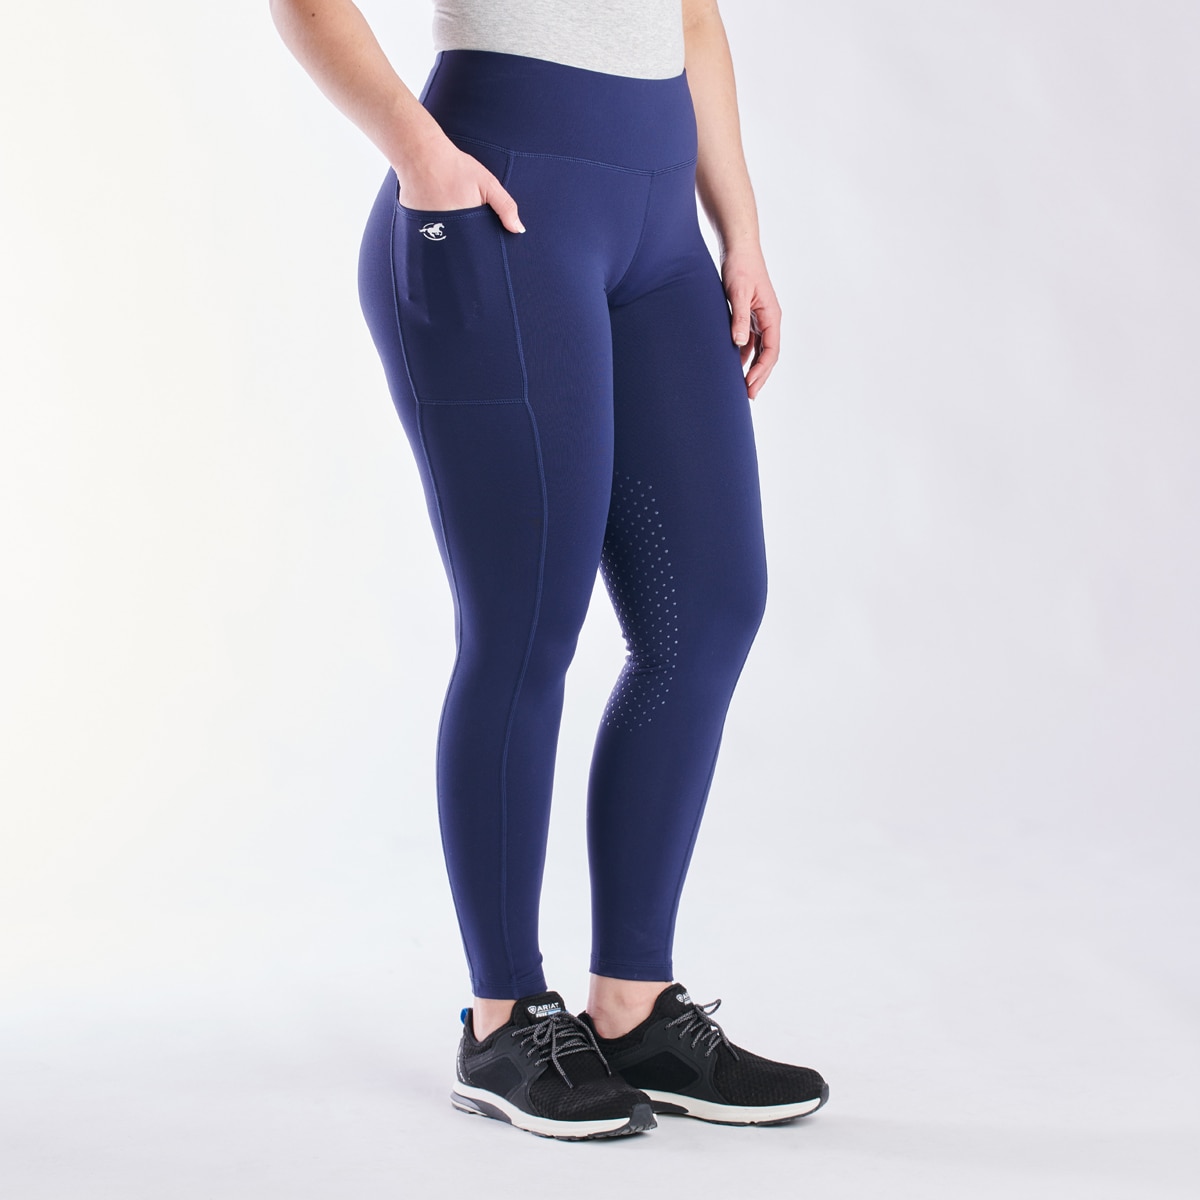 Piper Flex Tights by SmartPak- Knee Patch